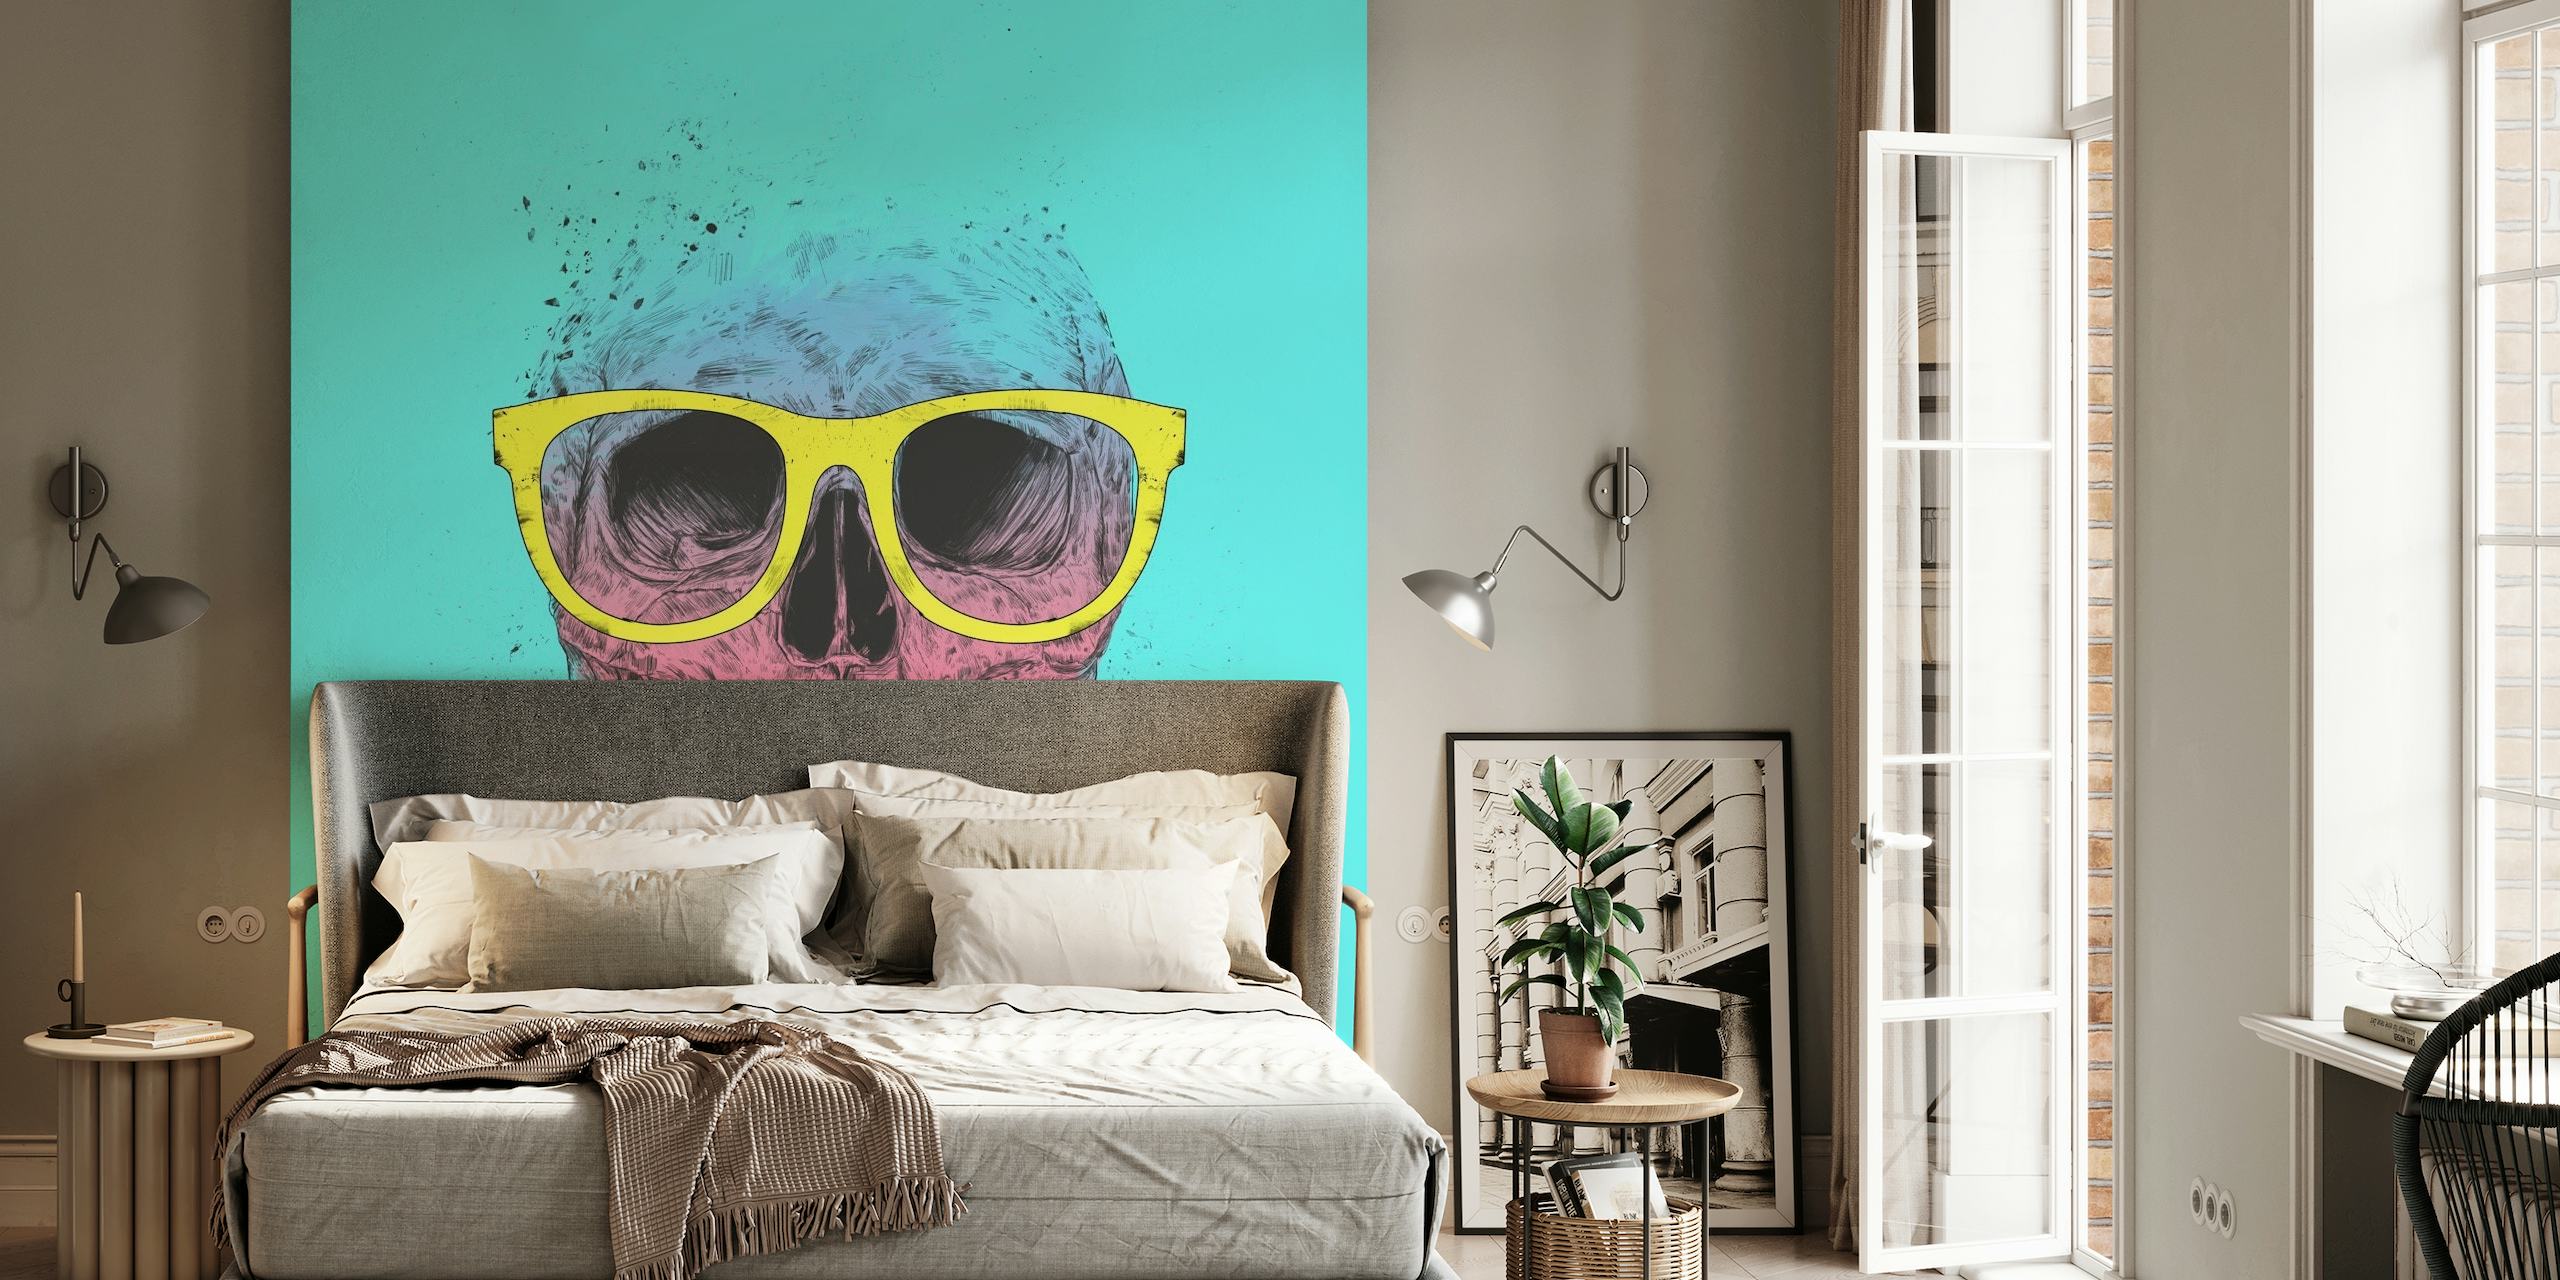 Colorful pop art style skull with yellow sunglasses wall mural